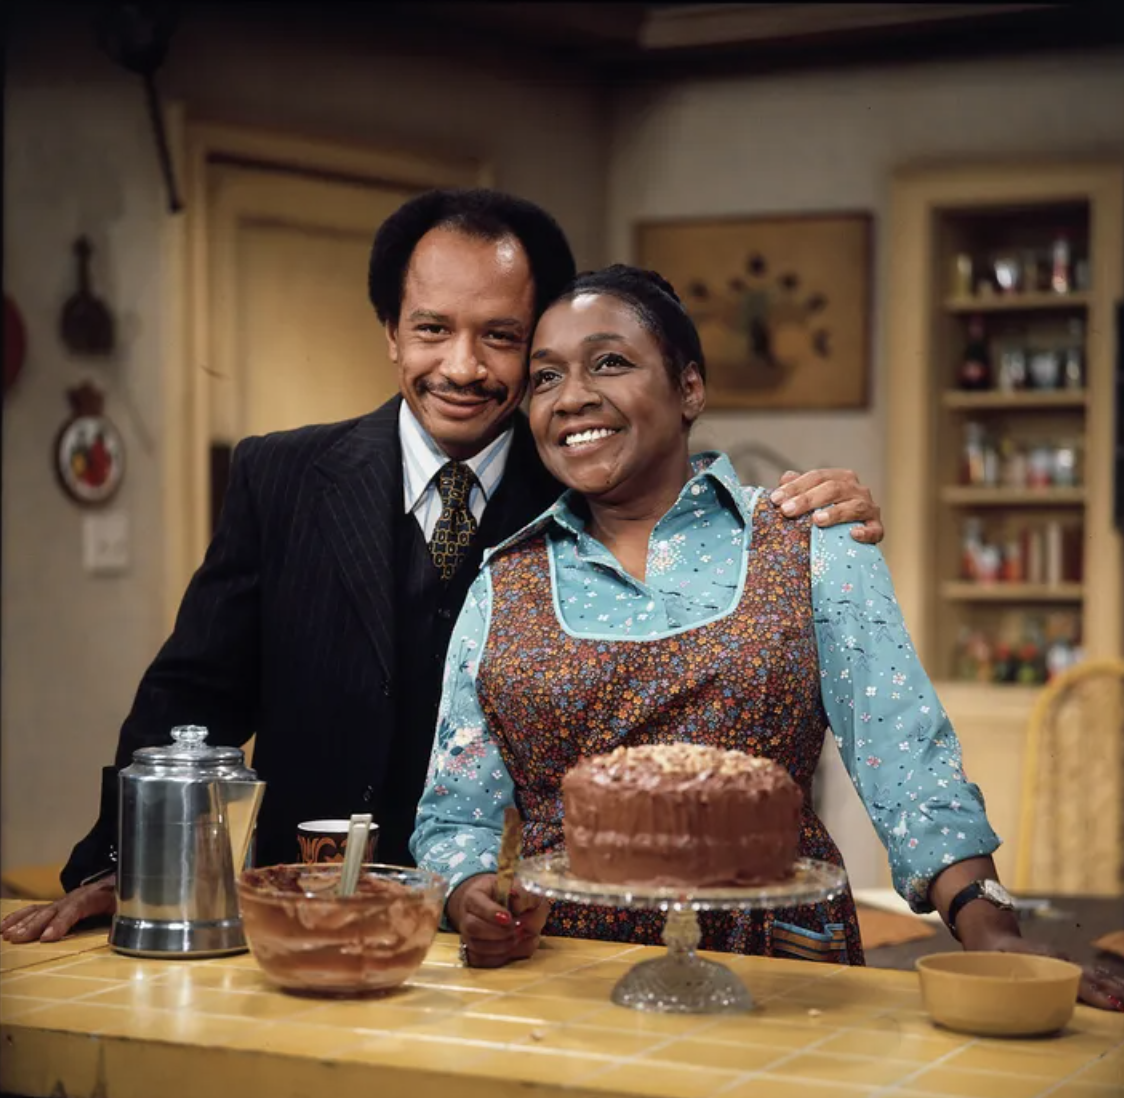 Two characters from a classic TV show in a kitchen, man in suit and woman in apron, smiling with a cake on the table